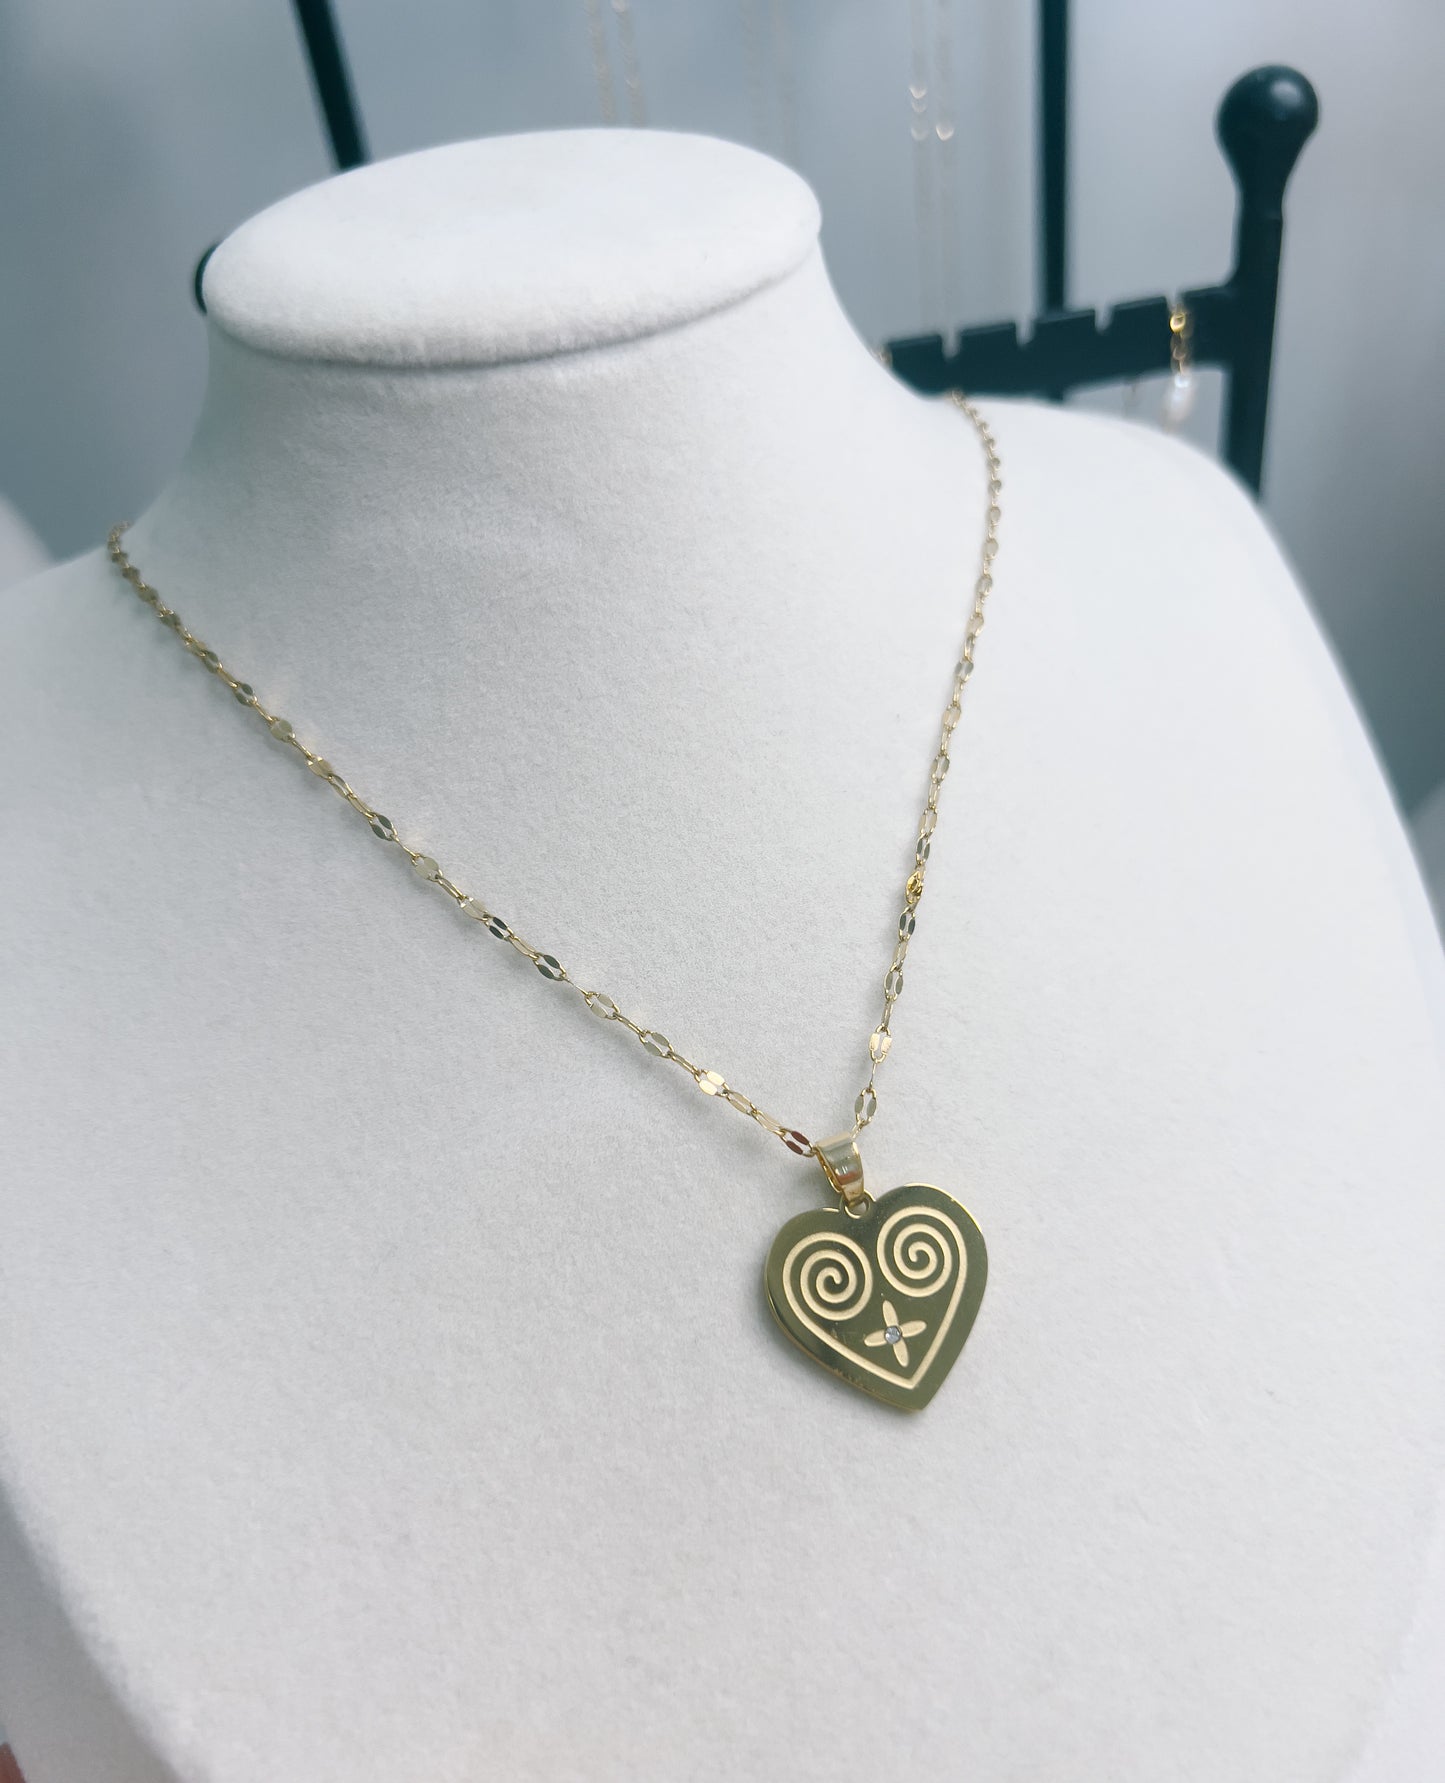 N18 - HMONG HEART NECKLACE